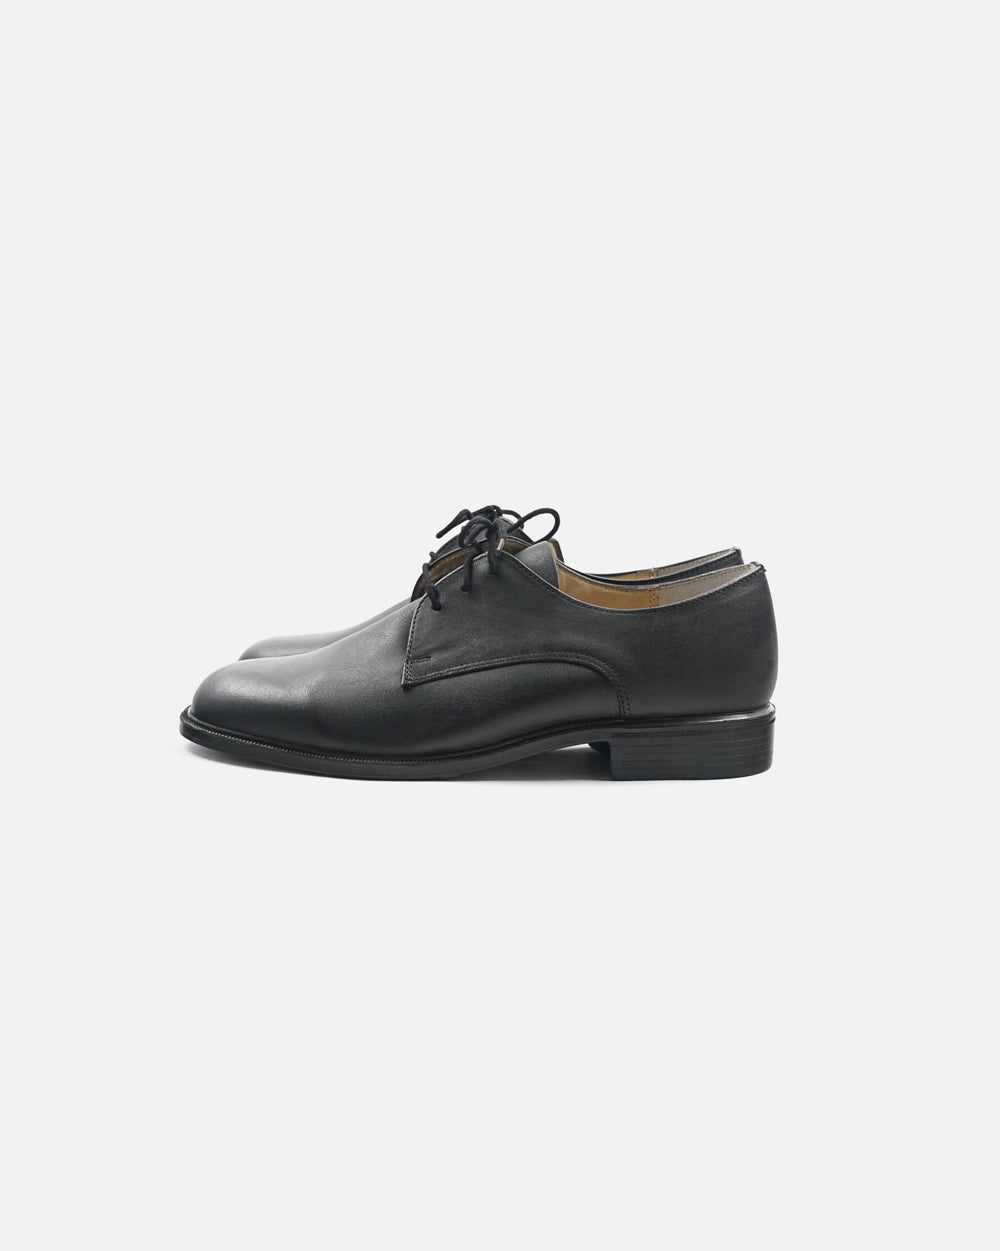 Officer Dress Shoes